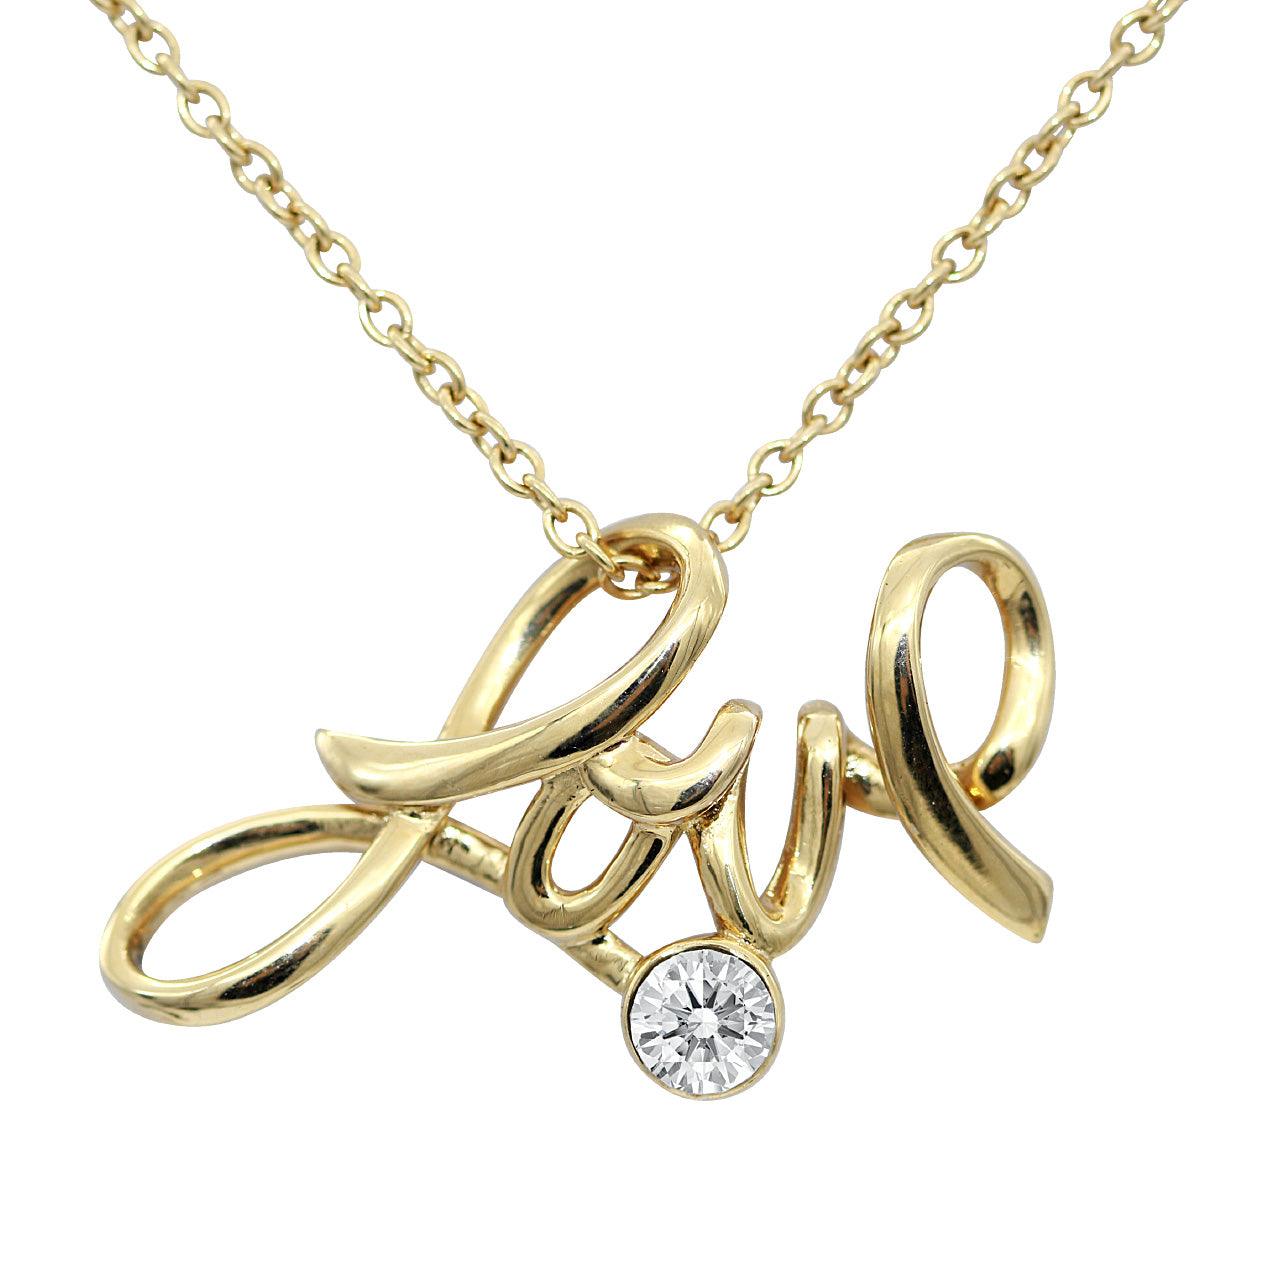 Love Necklace 24K Gold Plated with Swarovski Crystal Pendant - BelleHarris